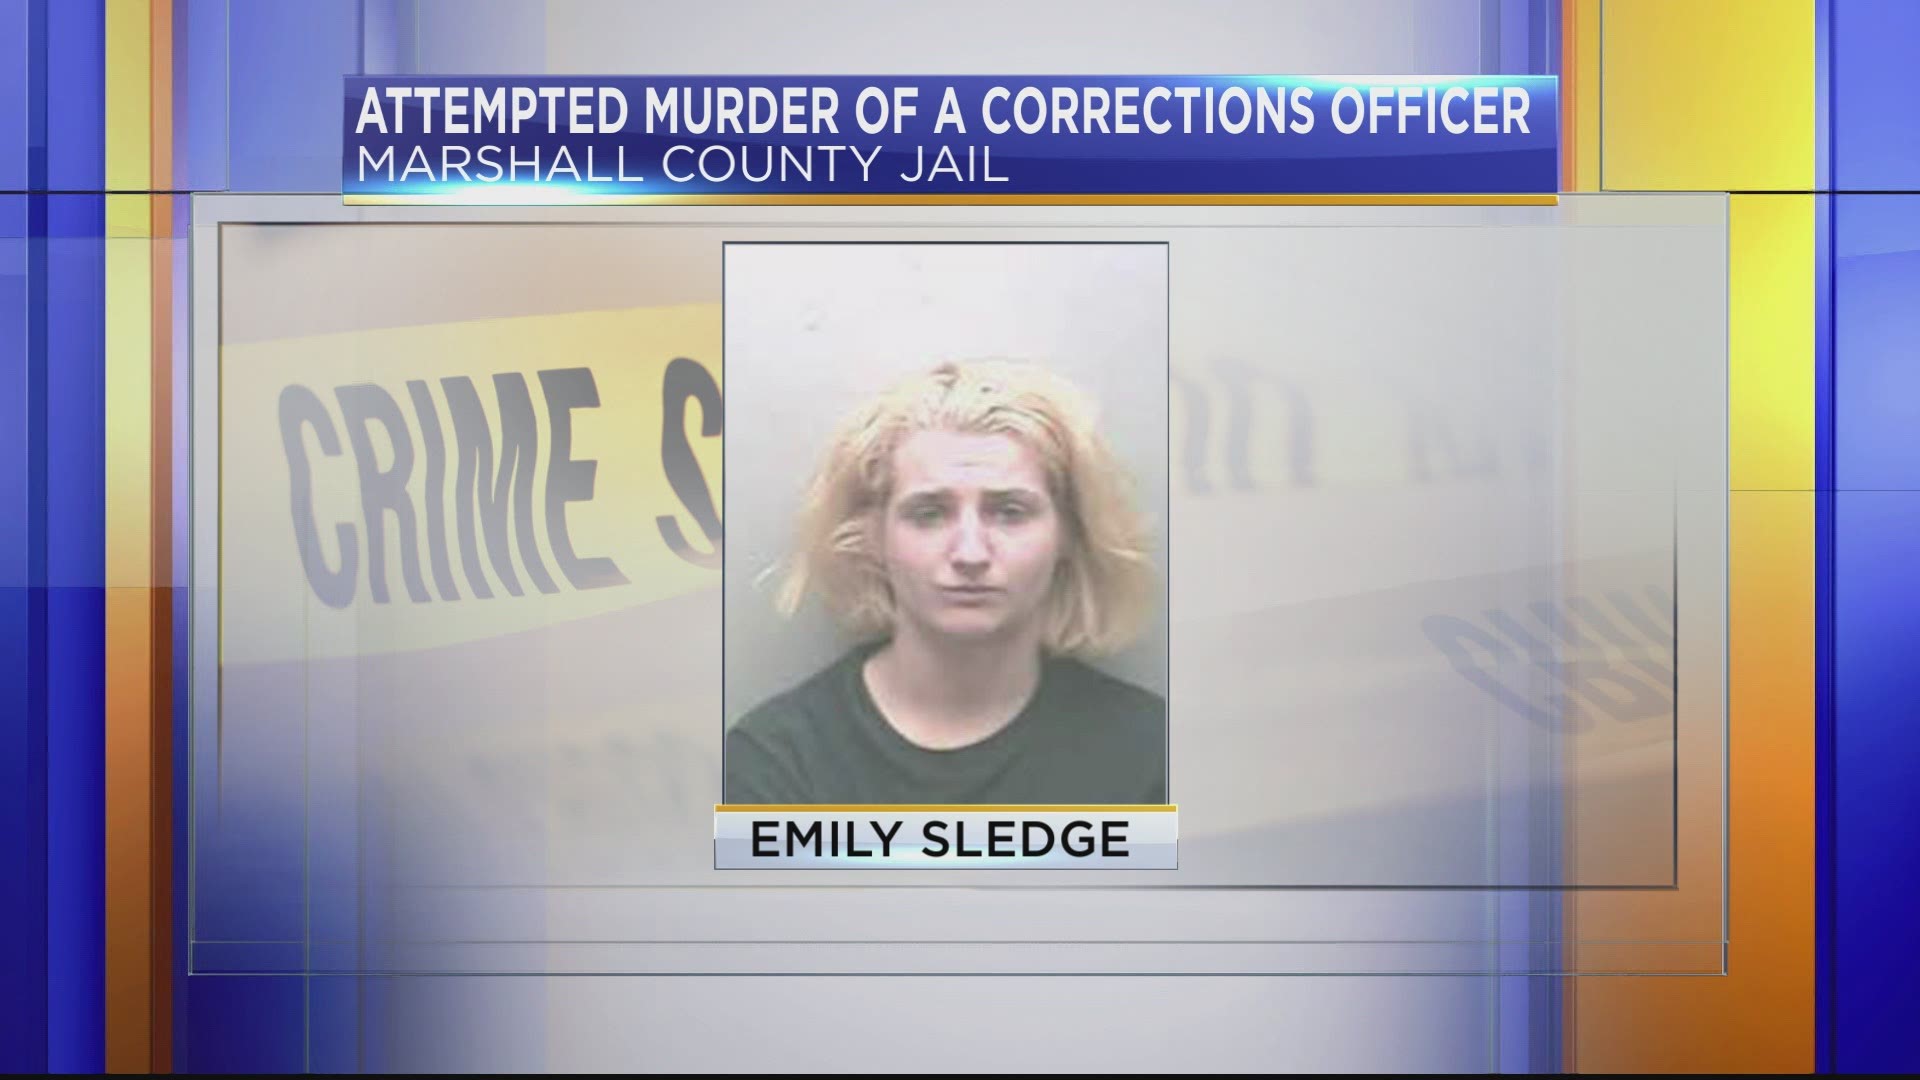 Several inmates came to the aid of the corrections officer to restrain the attacker until more officers arrived.